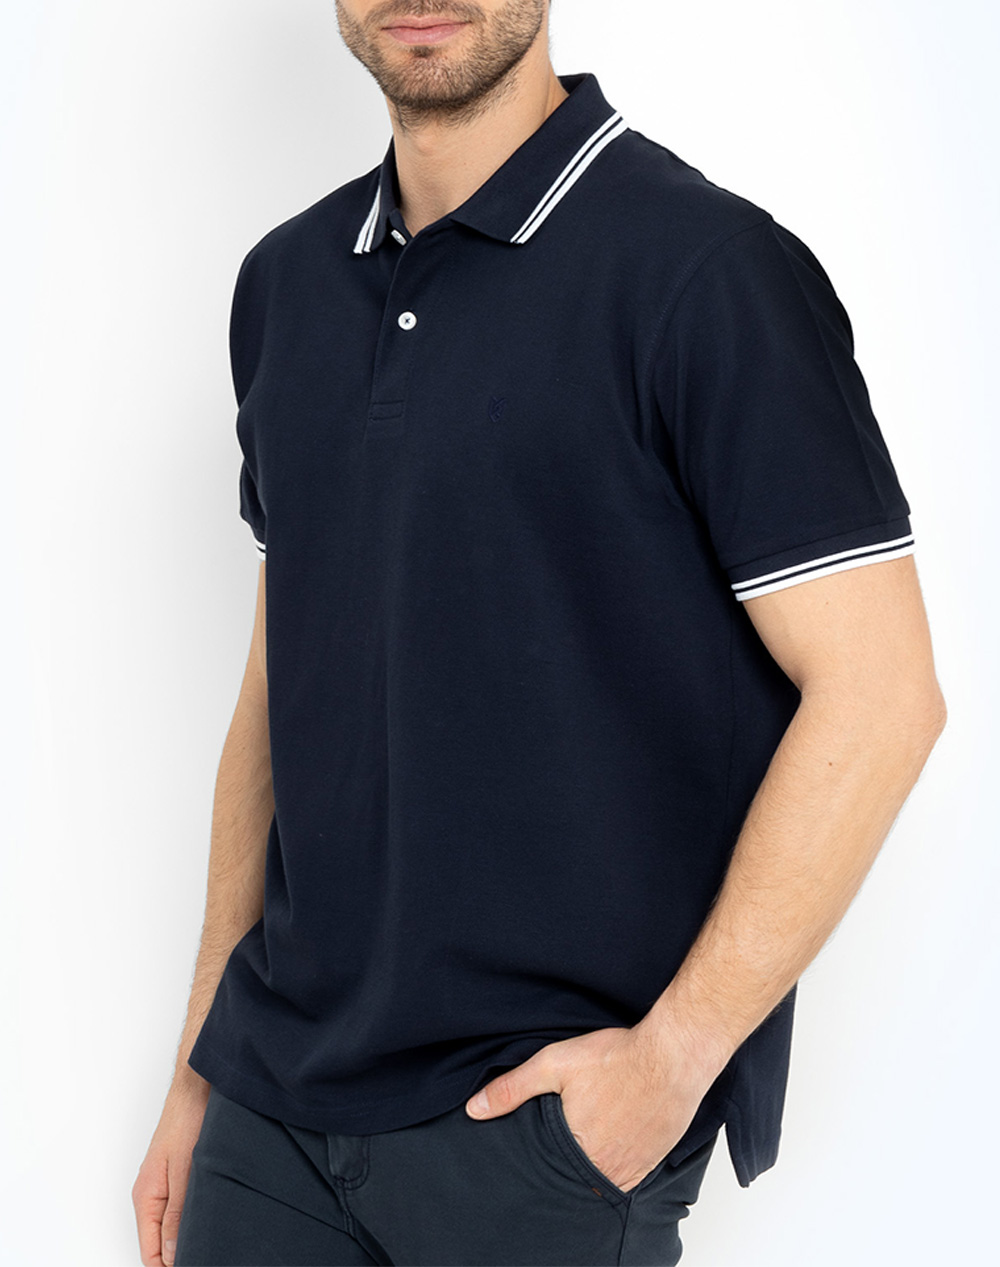 THE BOSTONIANS ΜΠΛΟΥΖΑ POLO PIQUE TWIN TIPPED REGULAR 3PS1271-NAVY DarkBlue 3820ABOST3410093_6131